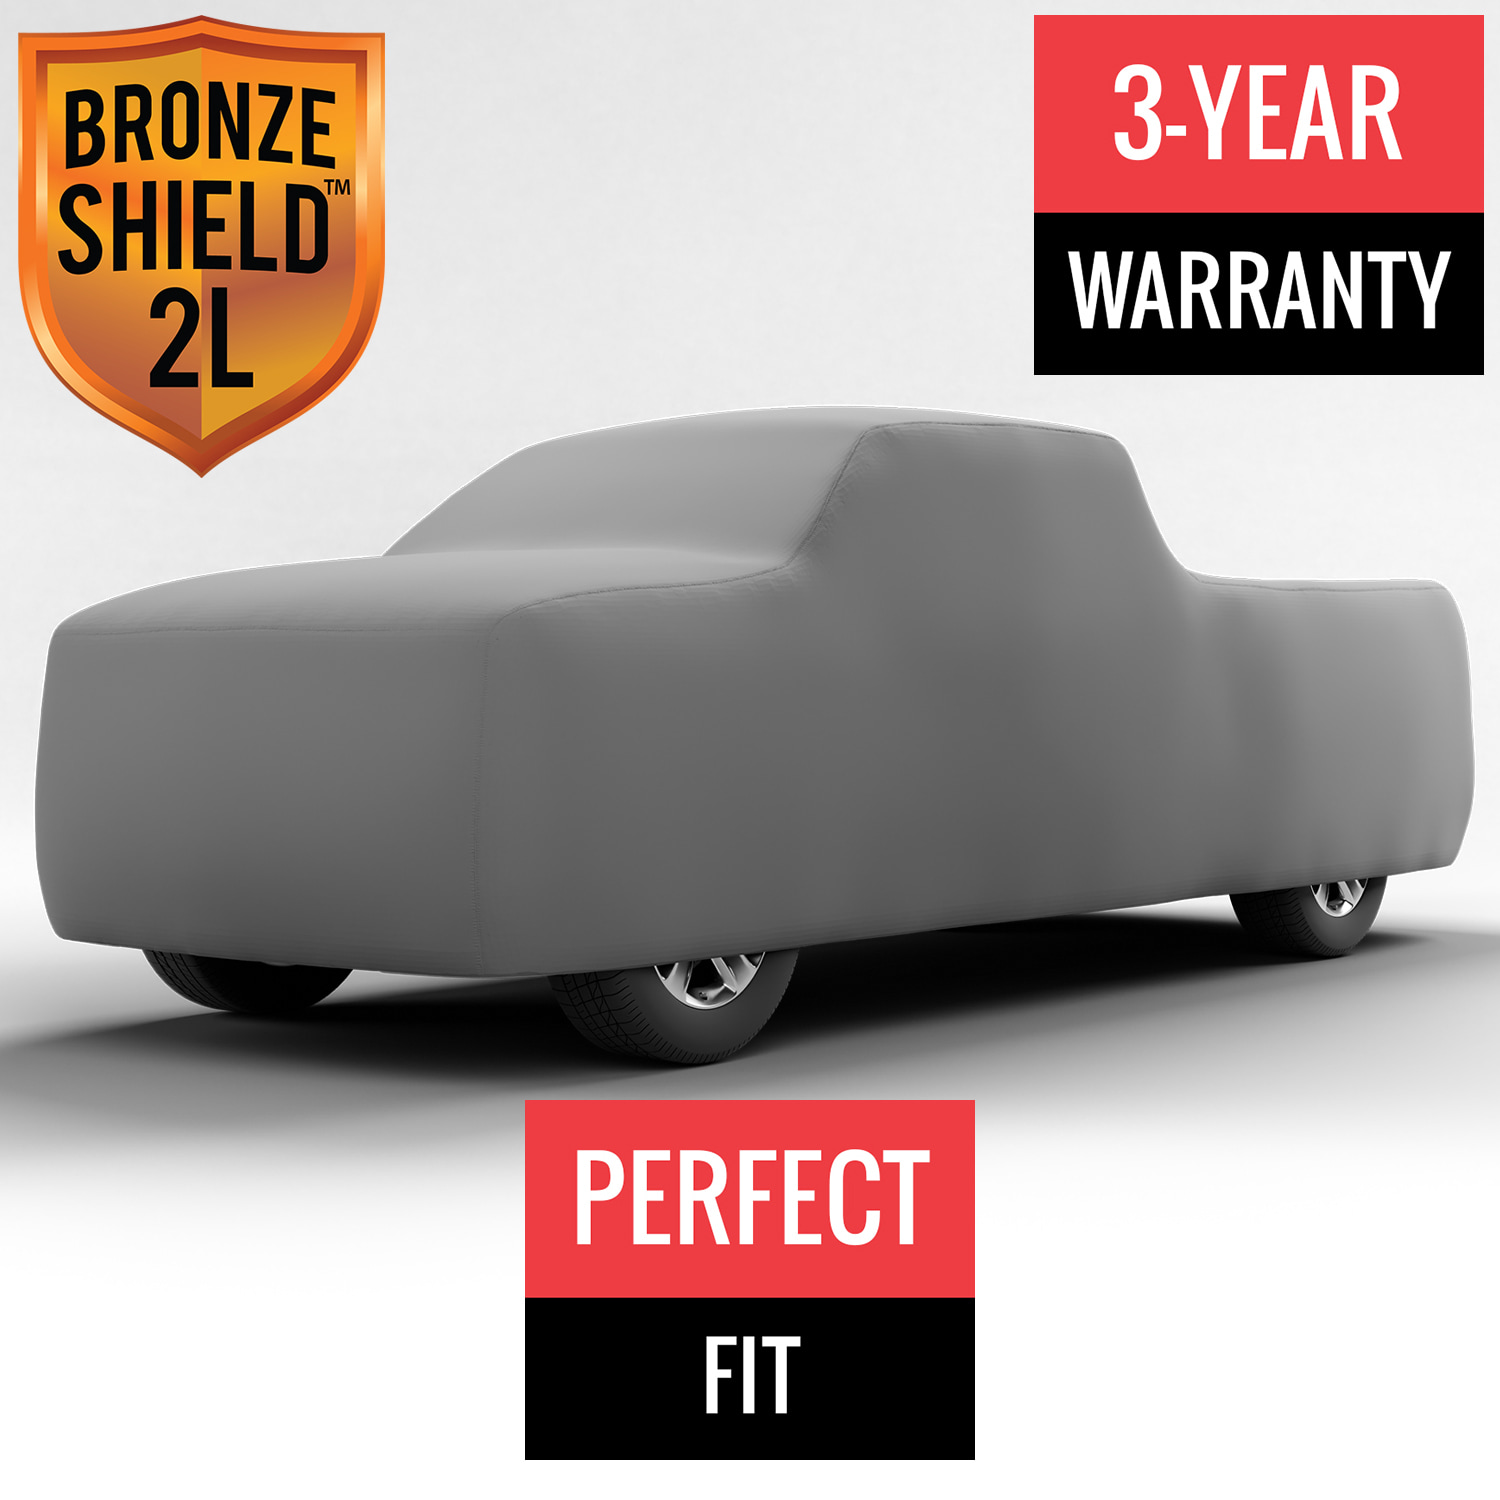 Bronze Shield 2L - Car Cover for GMC K25 Pickup 1970 Crew Cab Pickup 6.5 Feet Bed